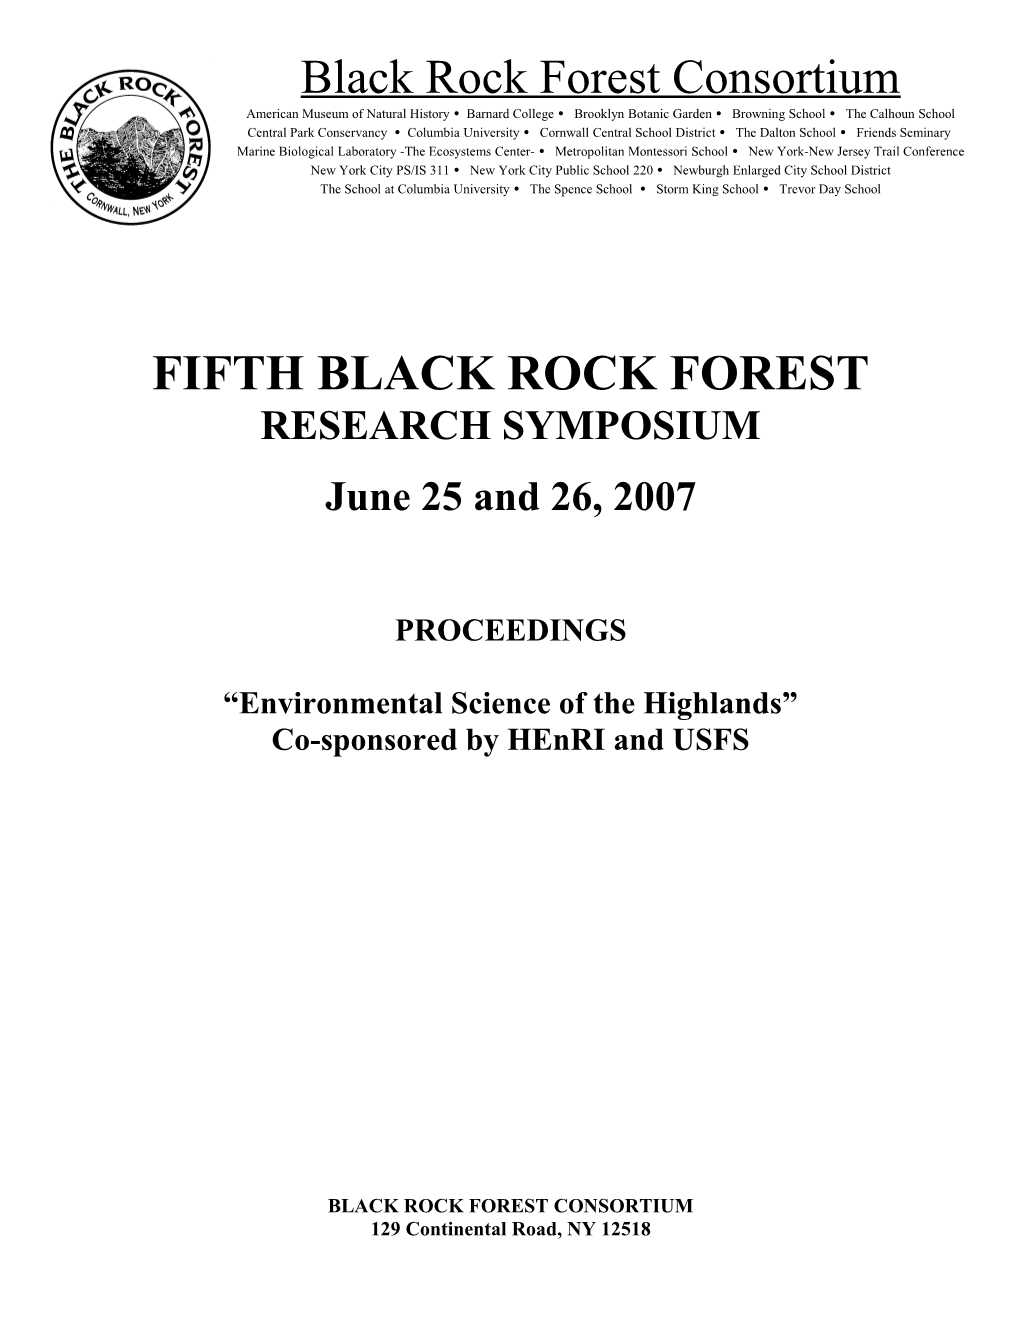 Fifth Black Rock Forest